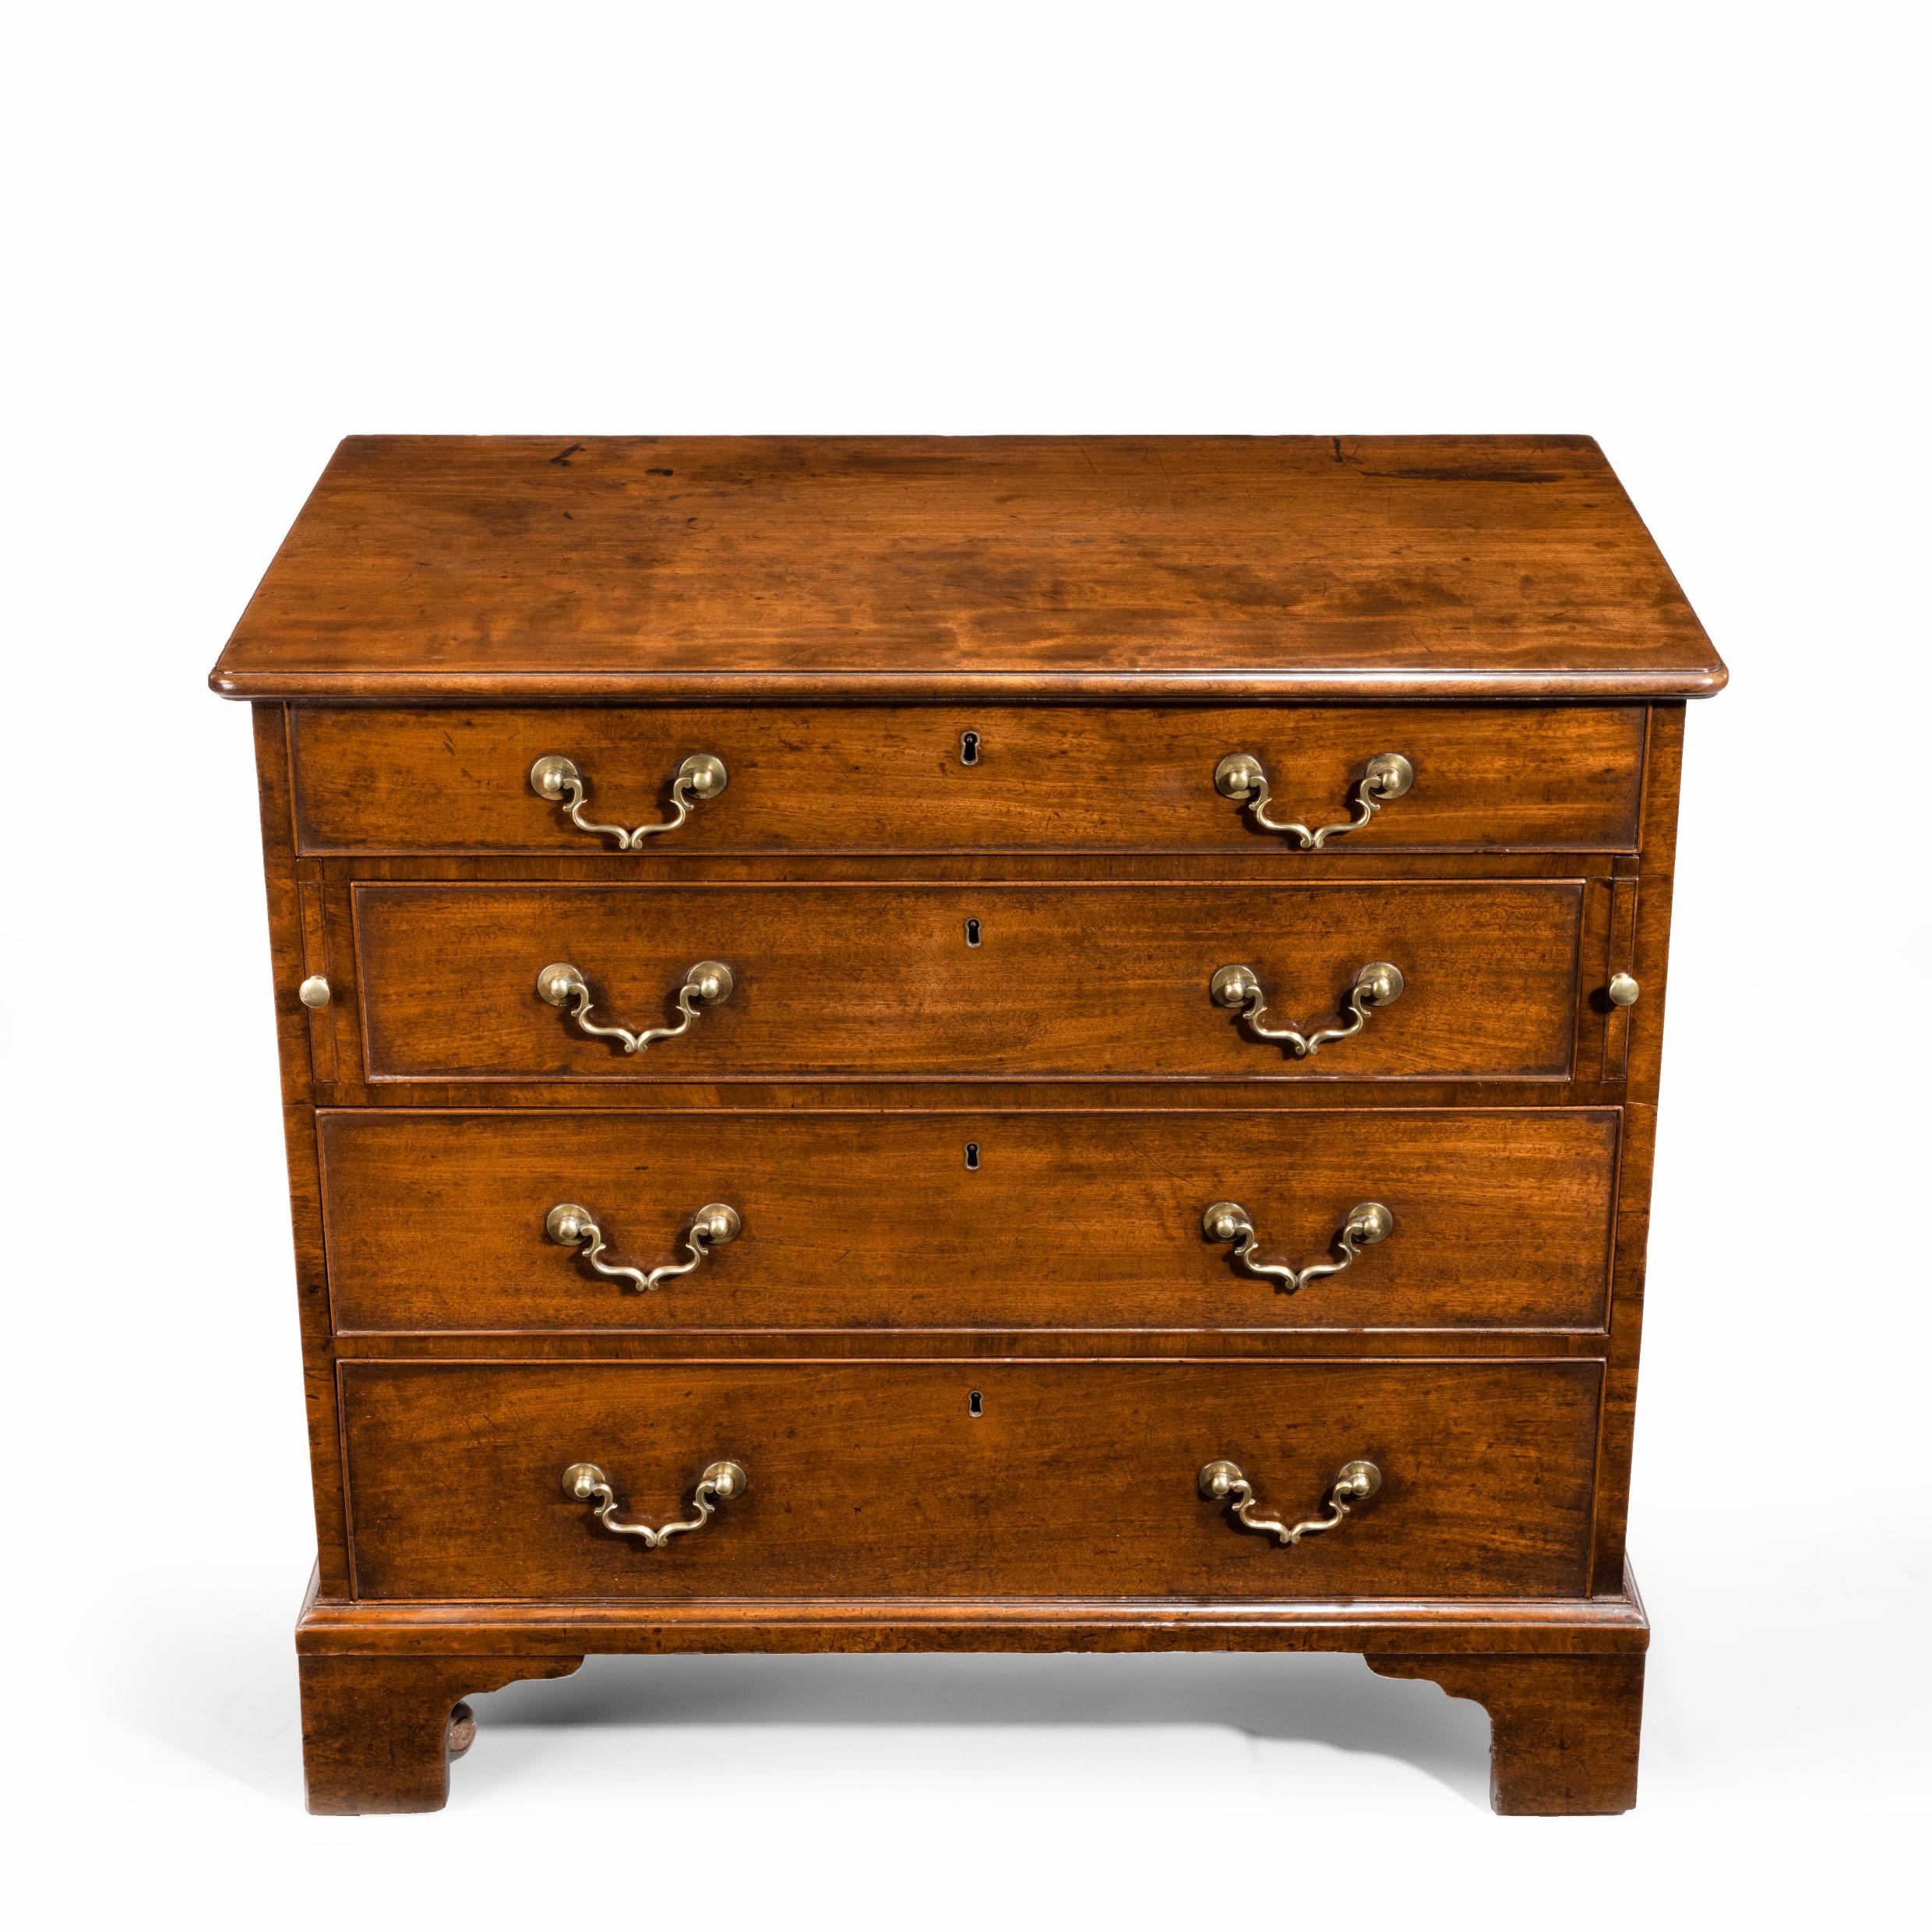 Late 18th Century George III, Chippendale Period, Mahogany Chest of Drawers